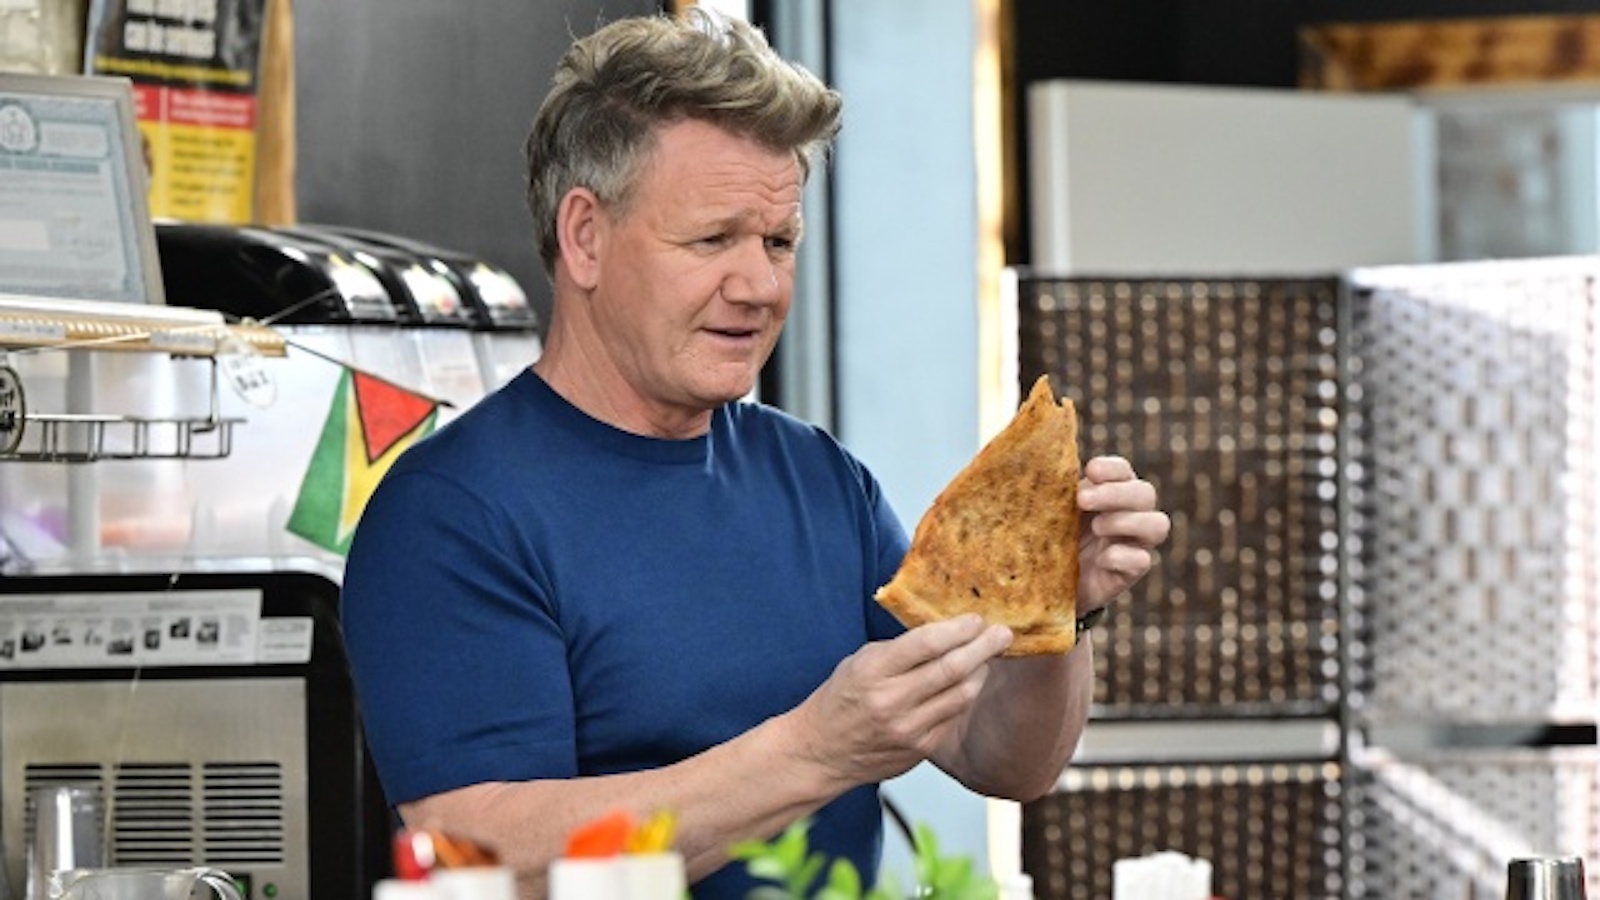 Has Gordon Ramsay ever actually liked a meal on Kitchen Nightmares?